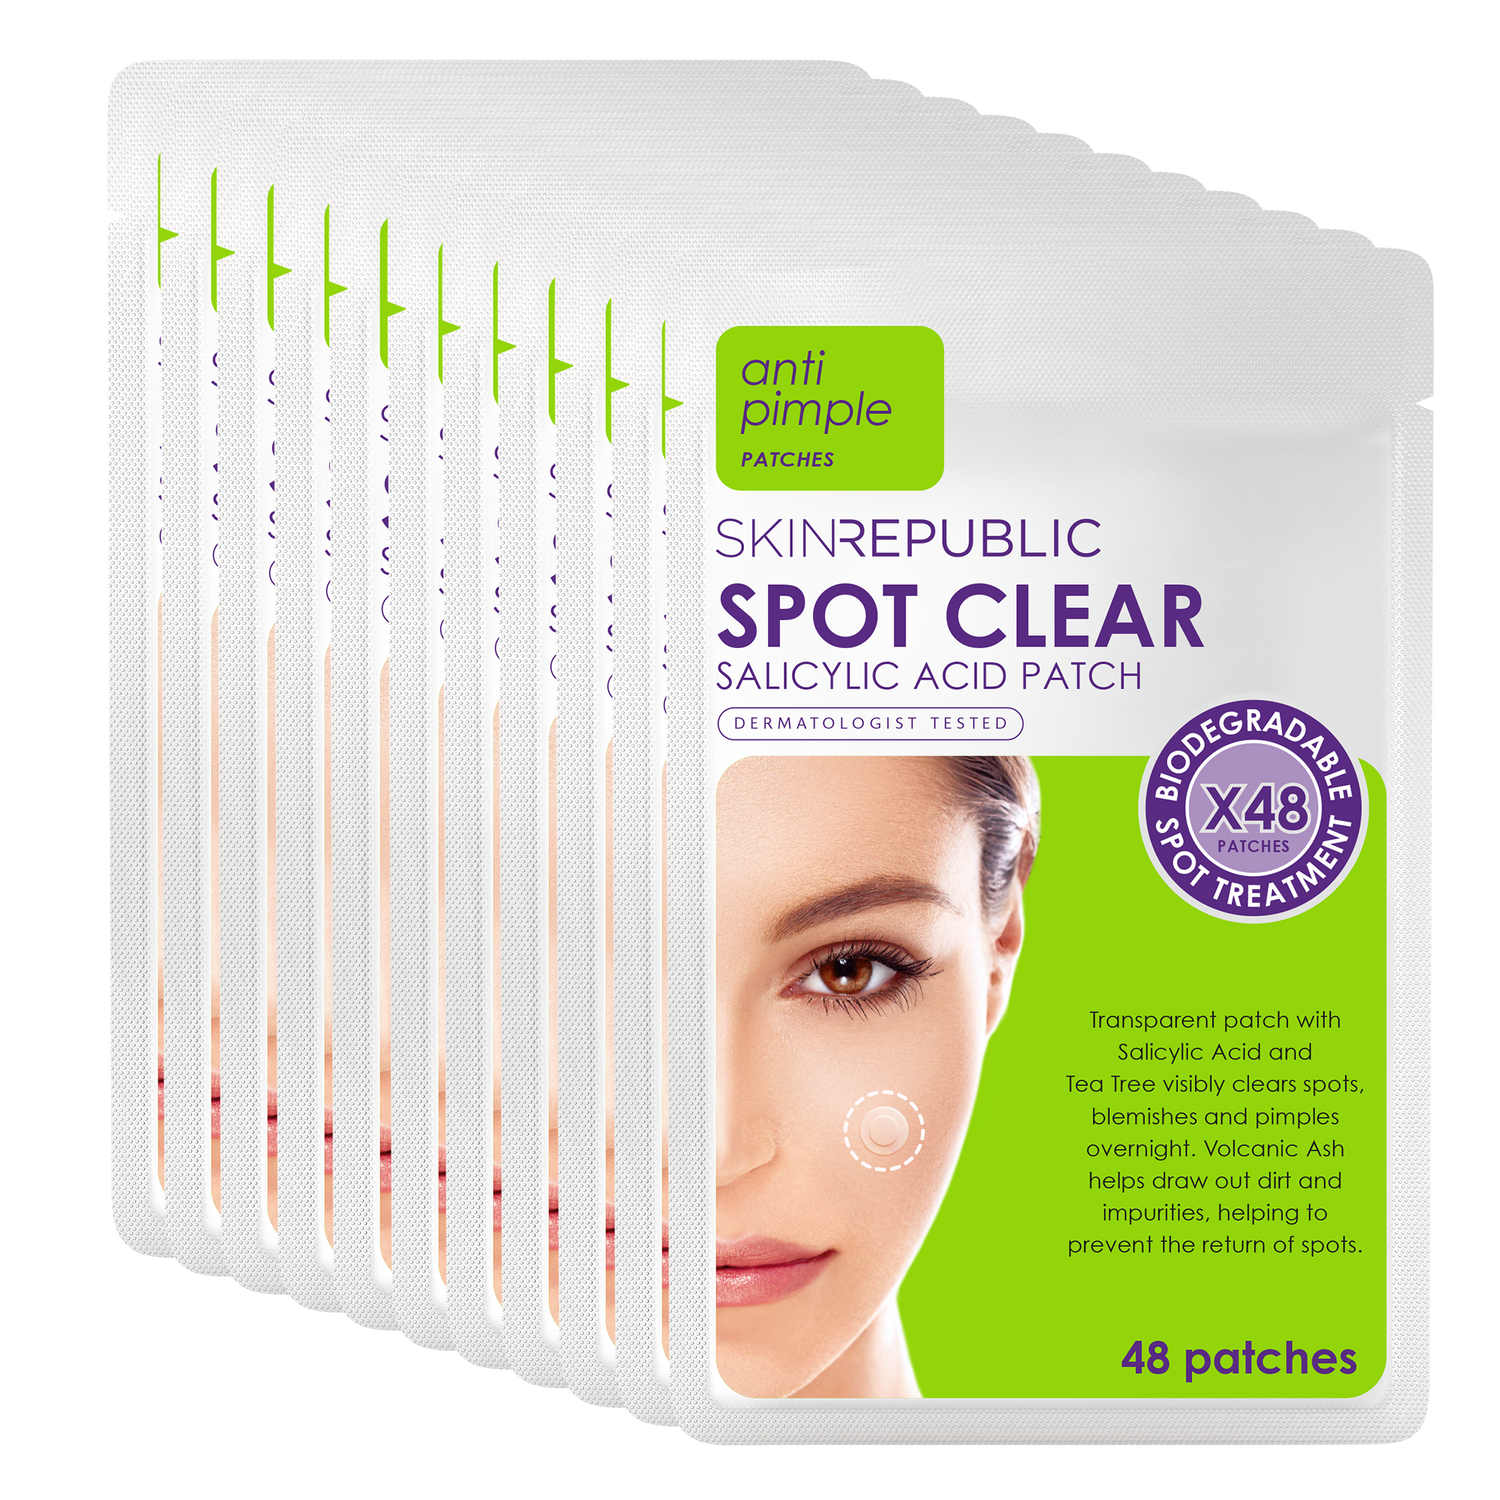 Pack of 10 - Spot Clear Pimple Patch with Salicylic Acid (48 Patches)